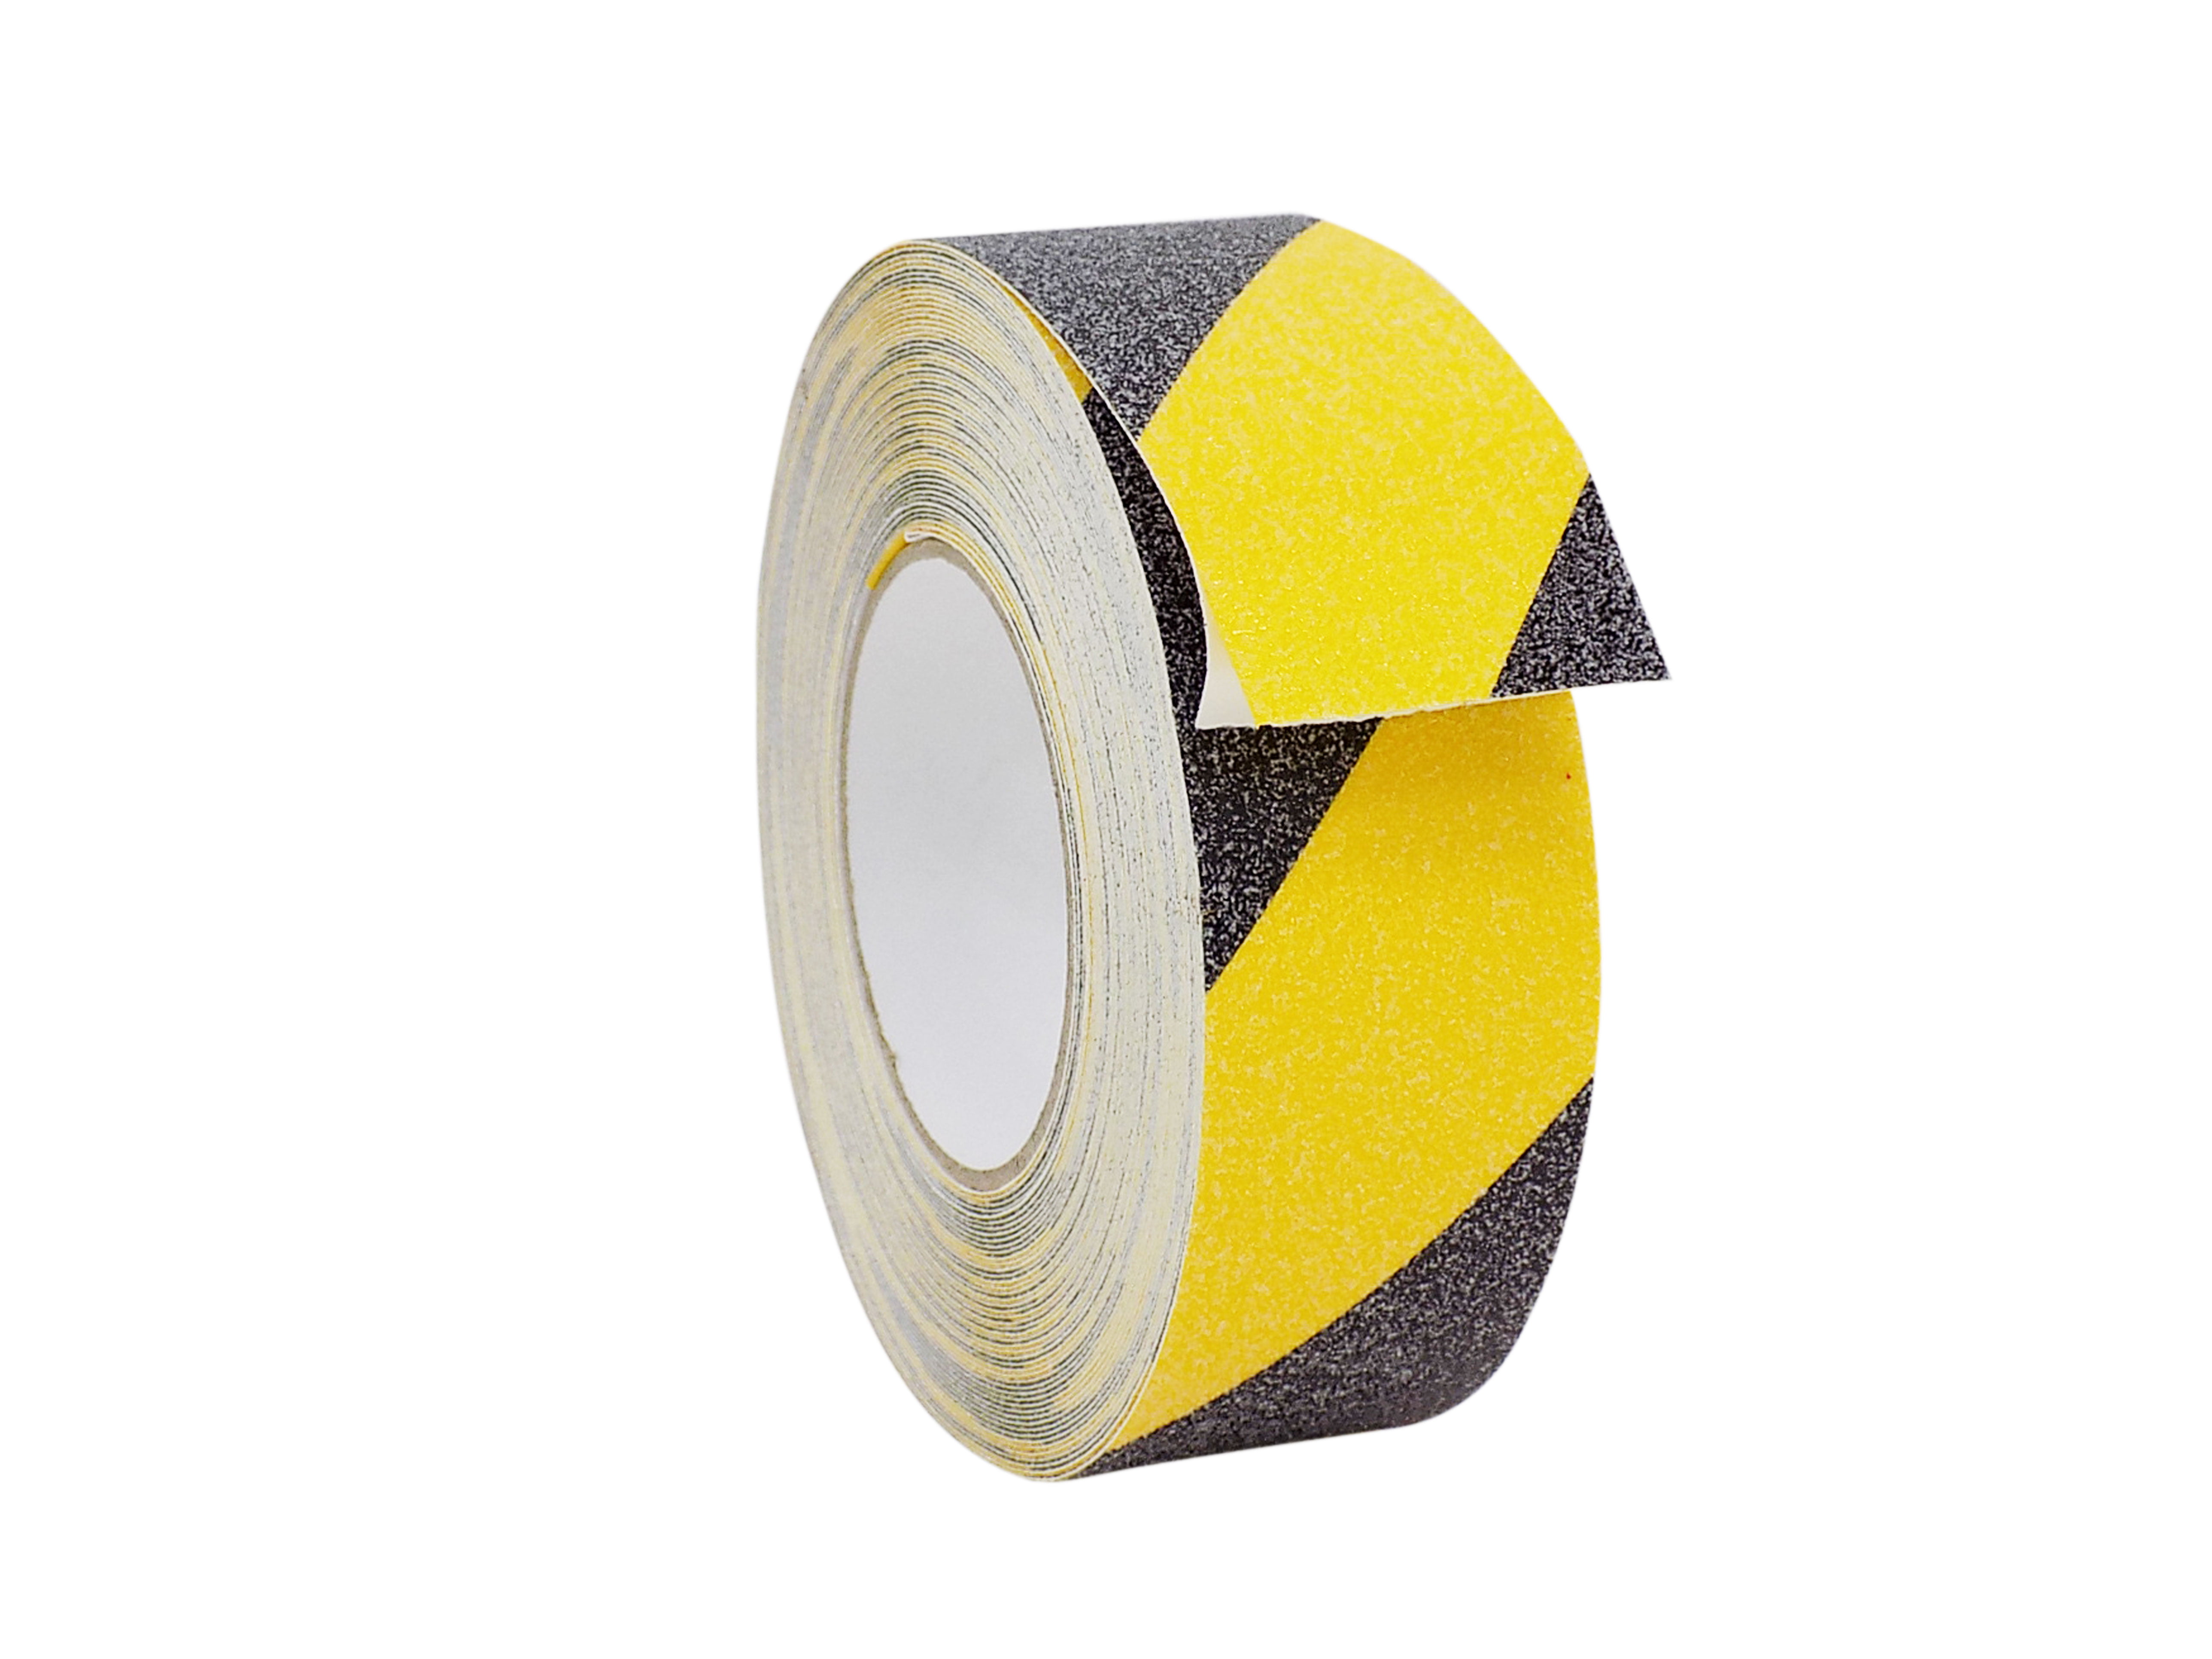 Anti Slip Tape Rolls for Strong Grip Waterproof Indoor Outdoor Strong Adhesive 